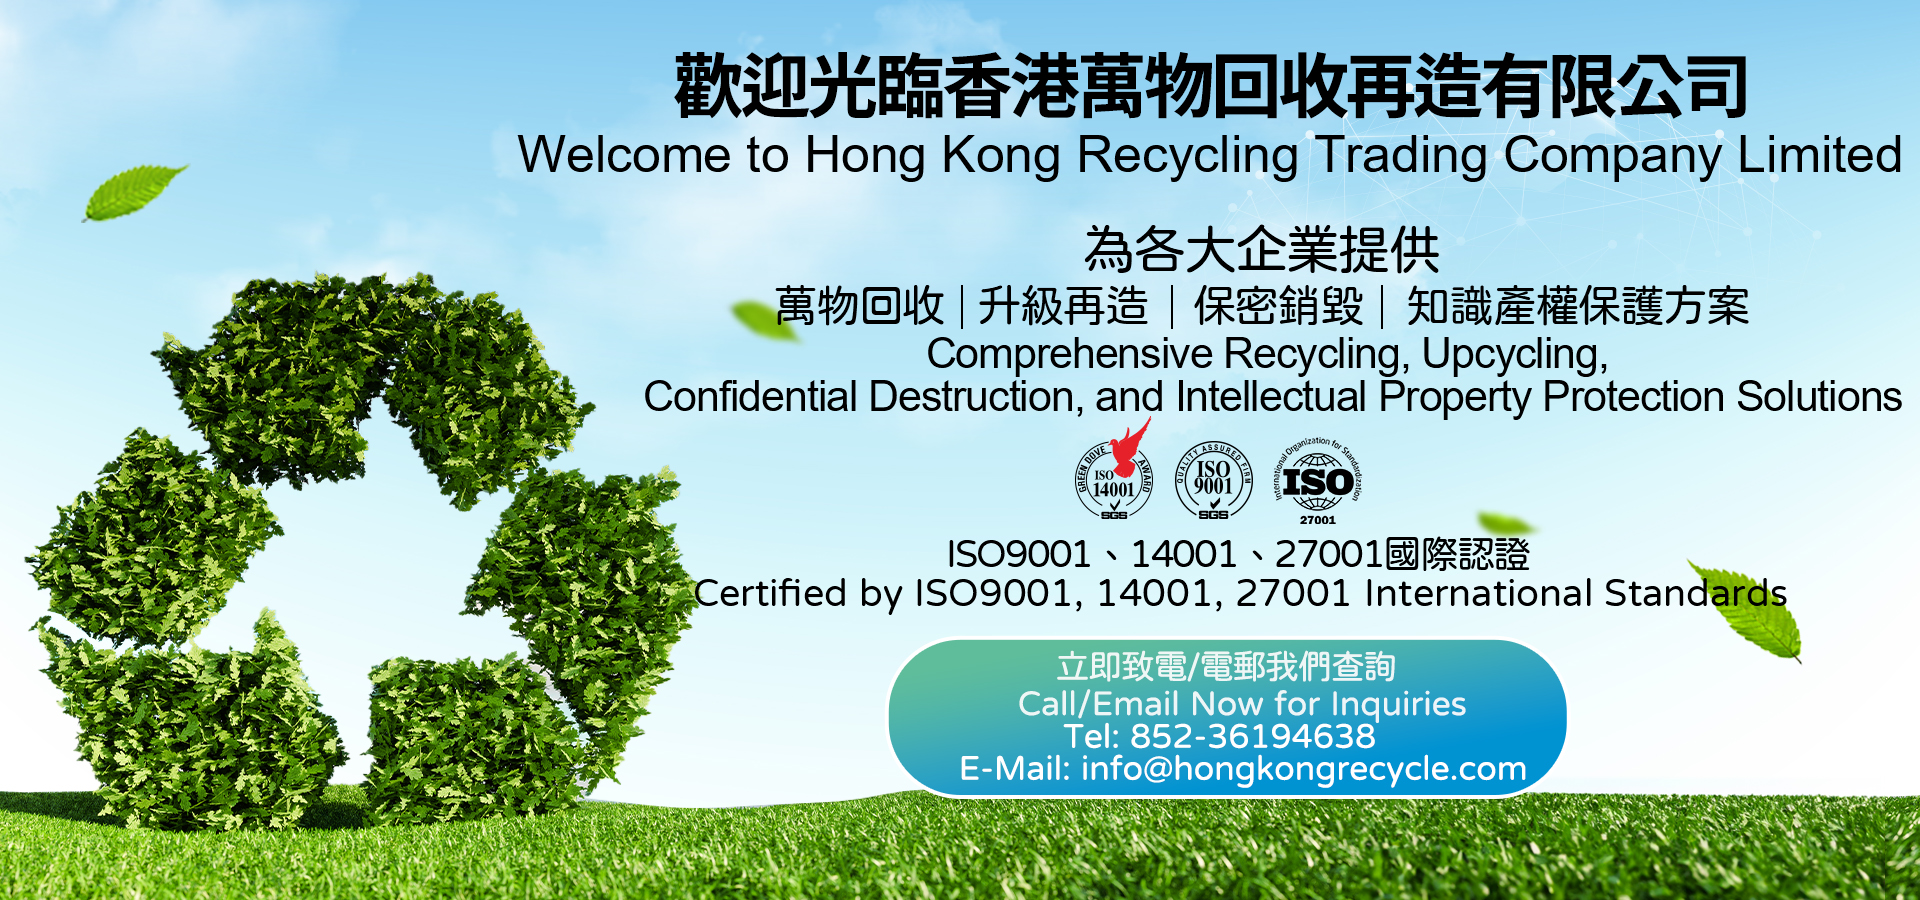 hkrecycle